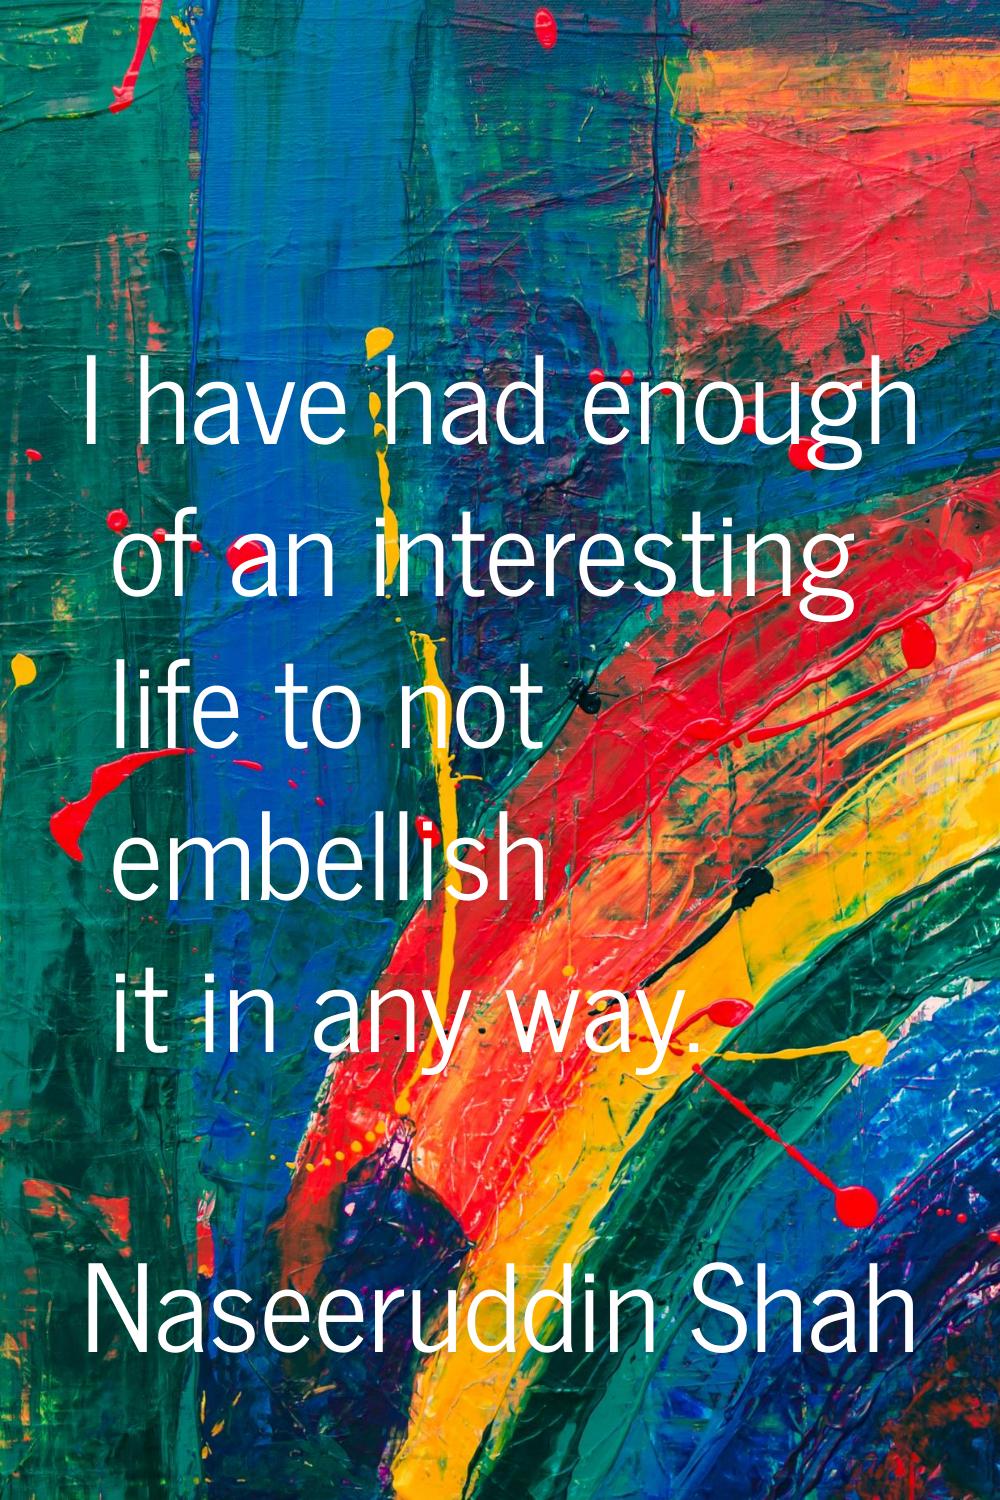 I have had enough of an interesting life to not embellish it in any way.